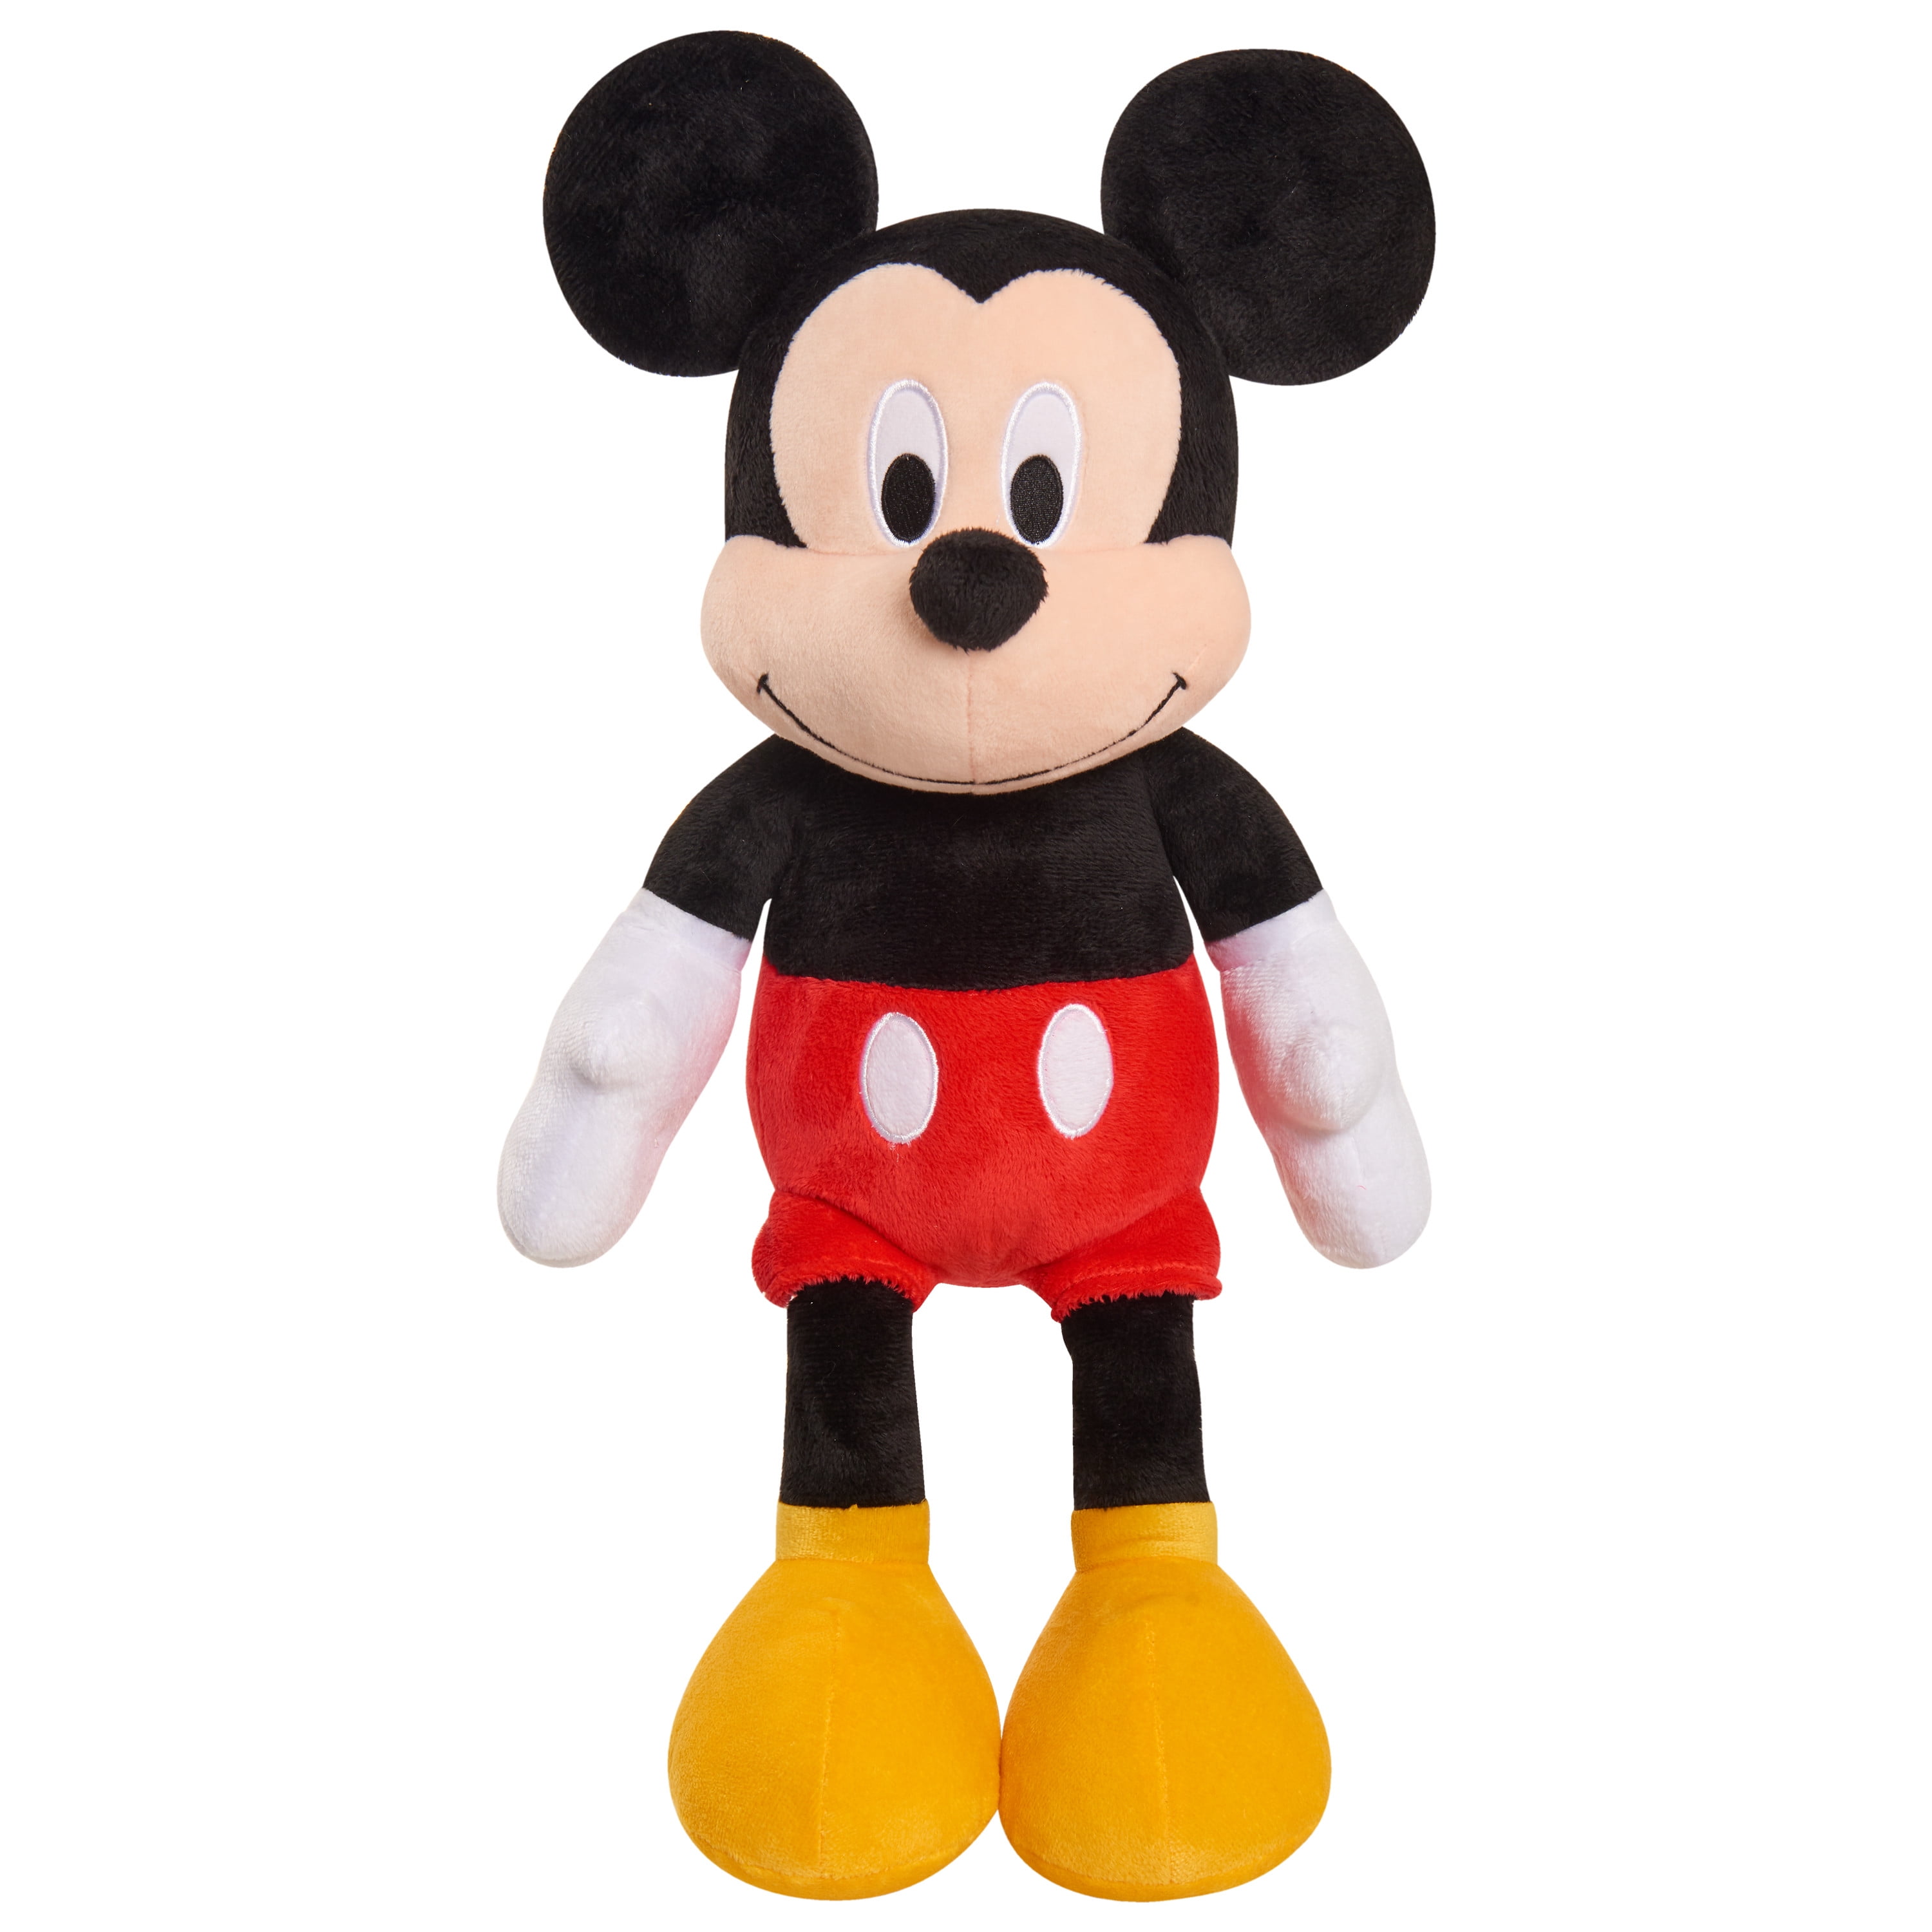 Authentic Mickey mouse memories january plush Shanghai Disney Steamboat  Willie